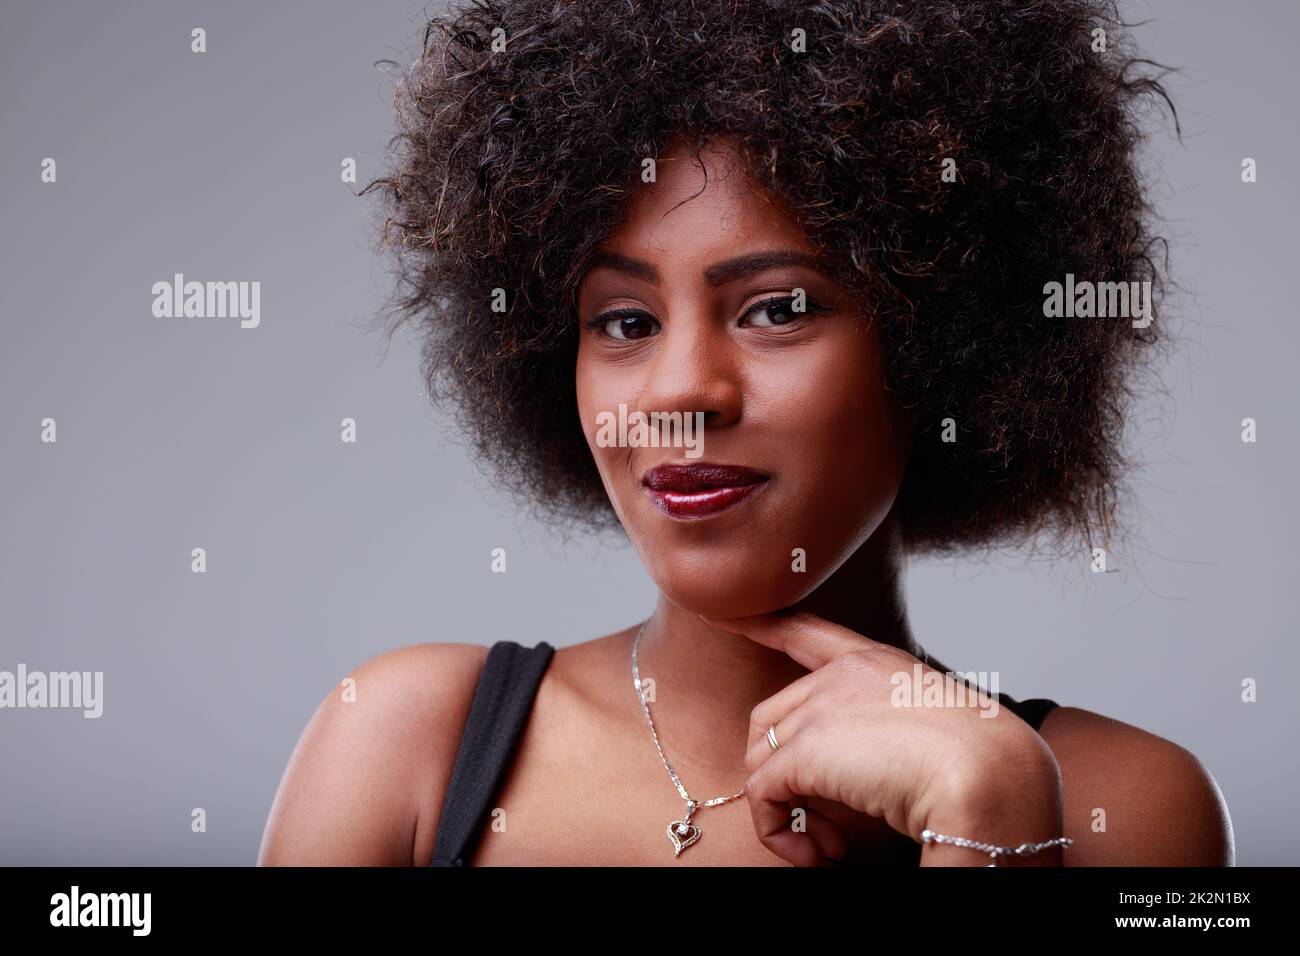 Sweet young Black woman with an impish grin Stock Photo